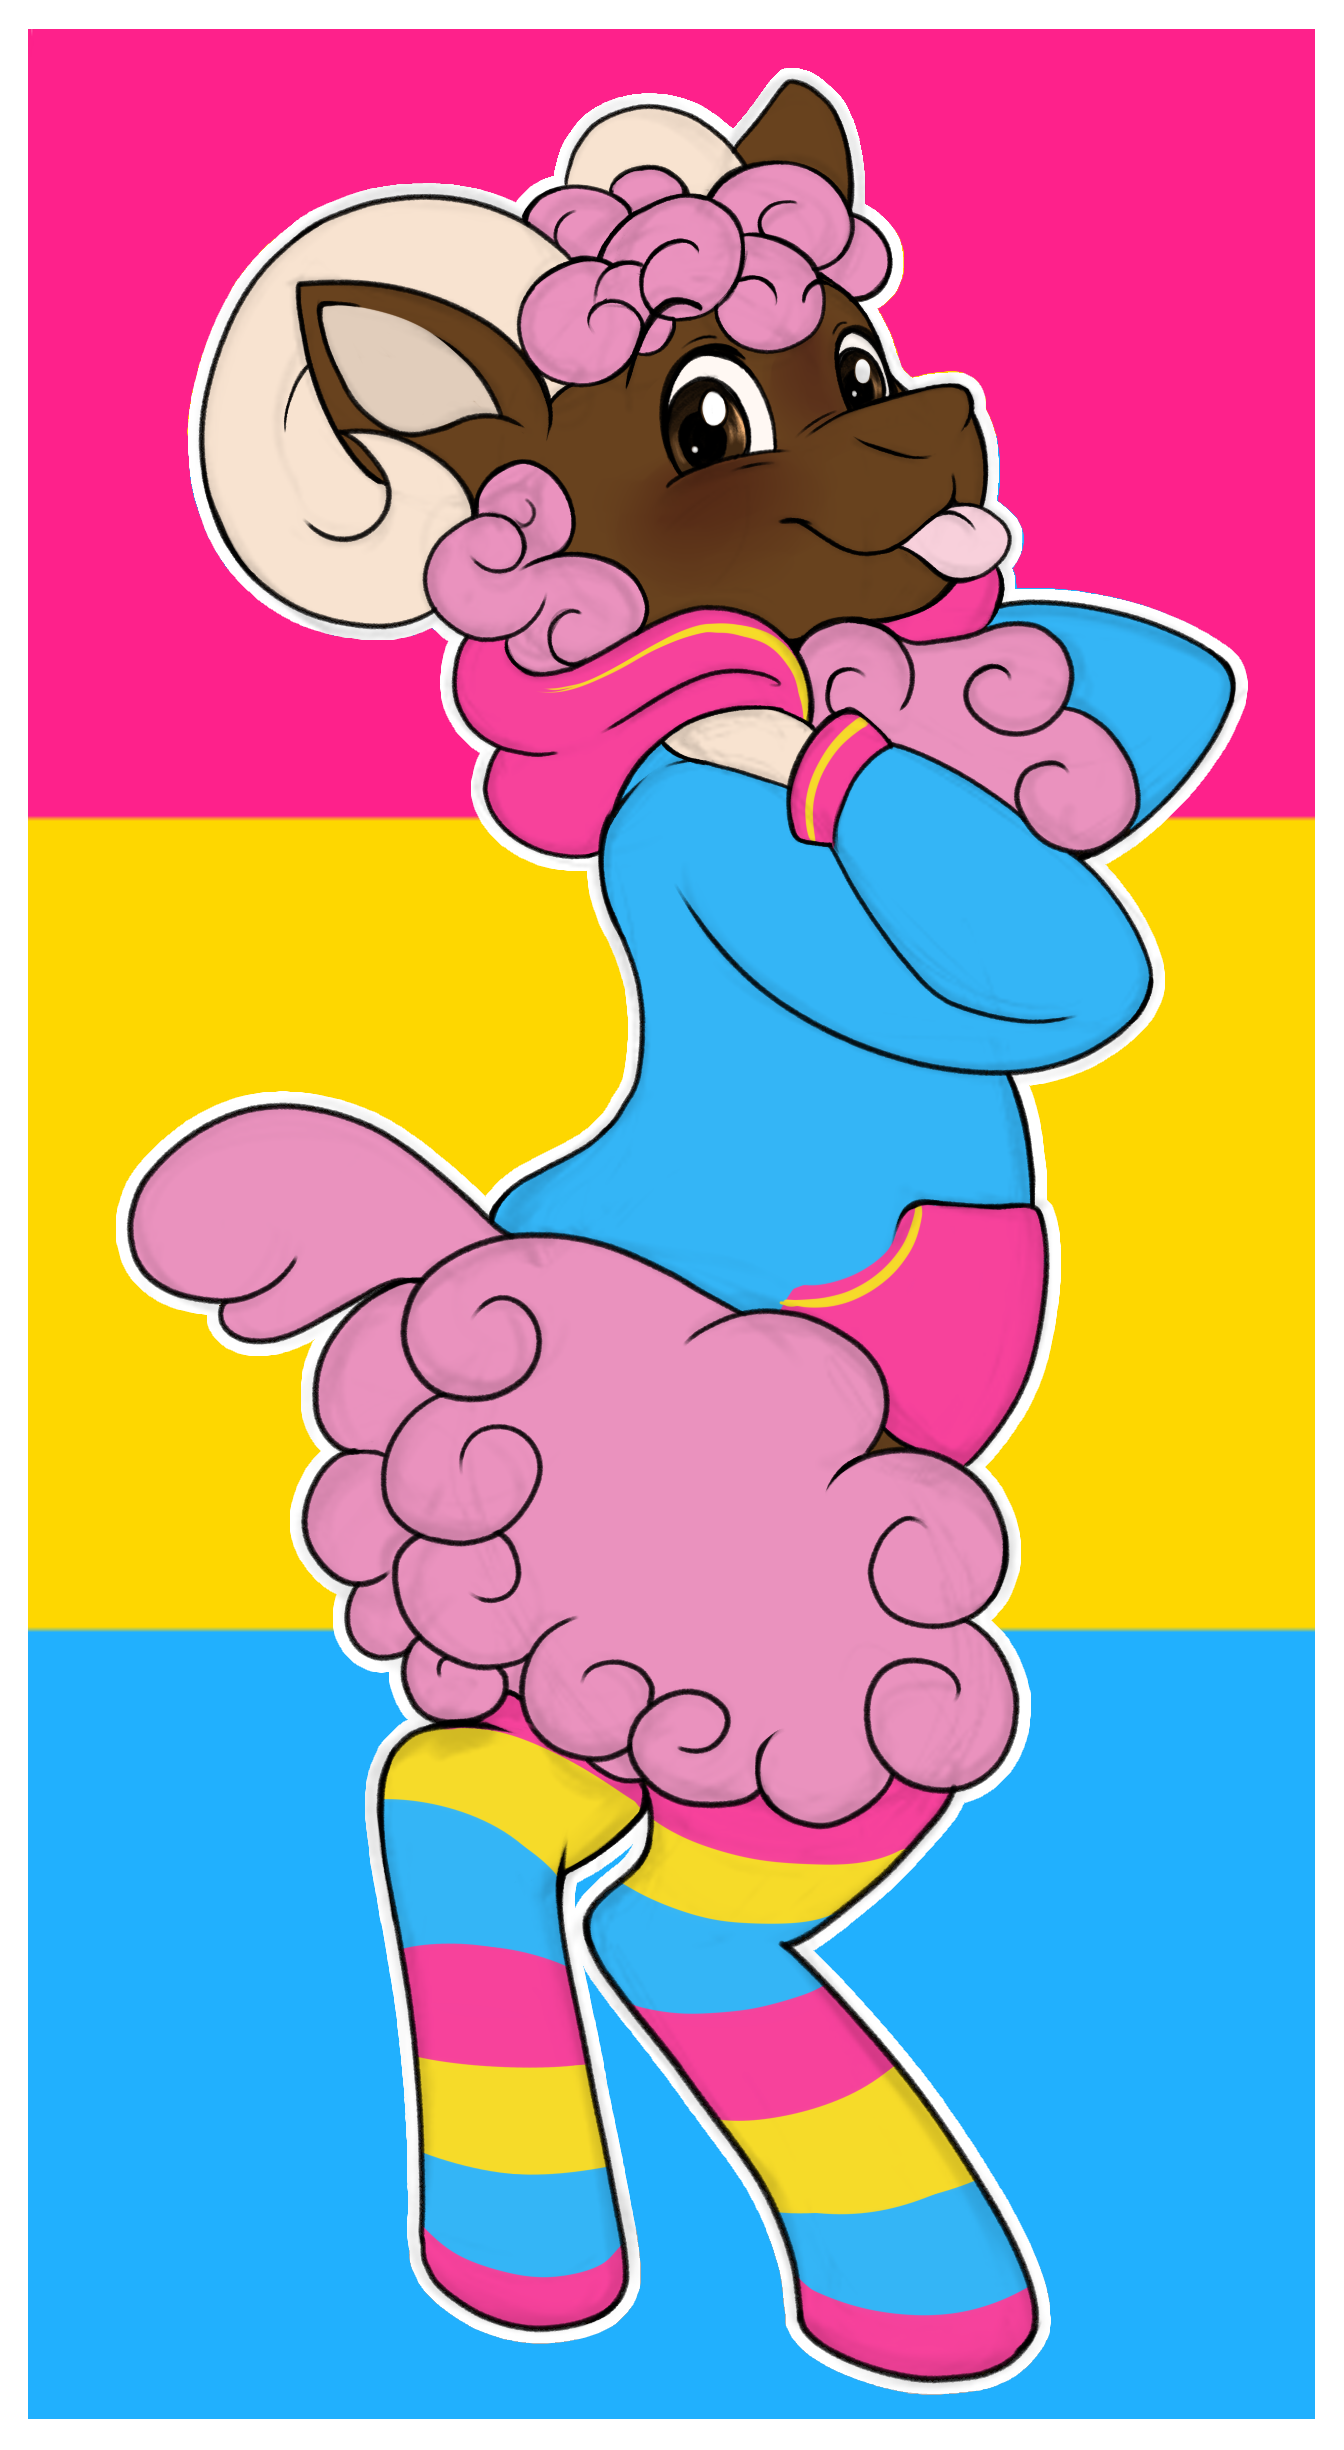 A digital drawing of Mallow. They are wearing thigh-high socks and a hoodie, all in the colors of the pan flag. They are looking at the viewer with their tongue sticking out. The background is a pan flag.